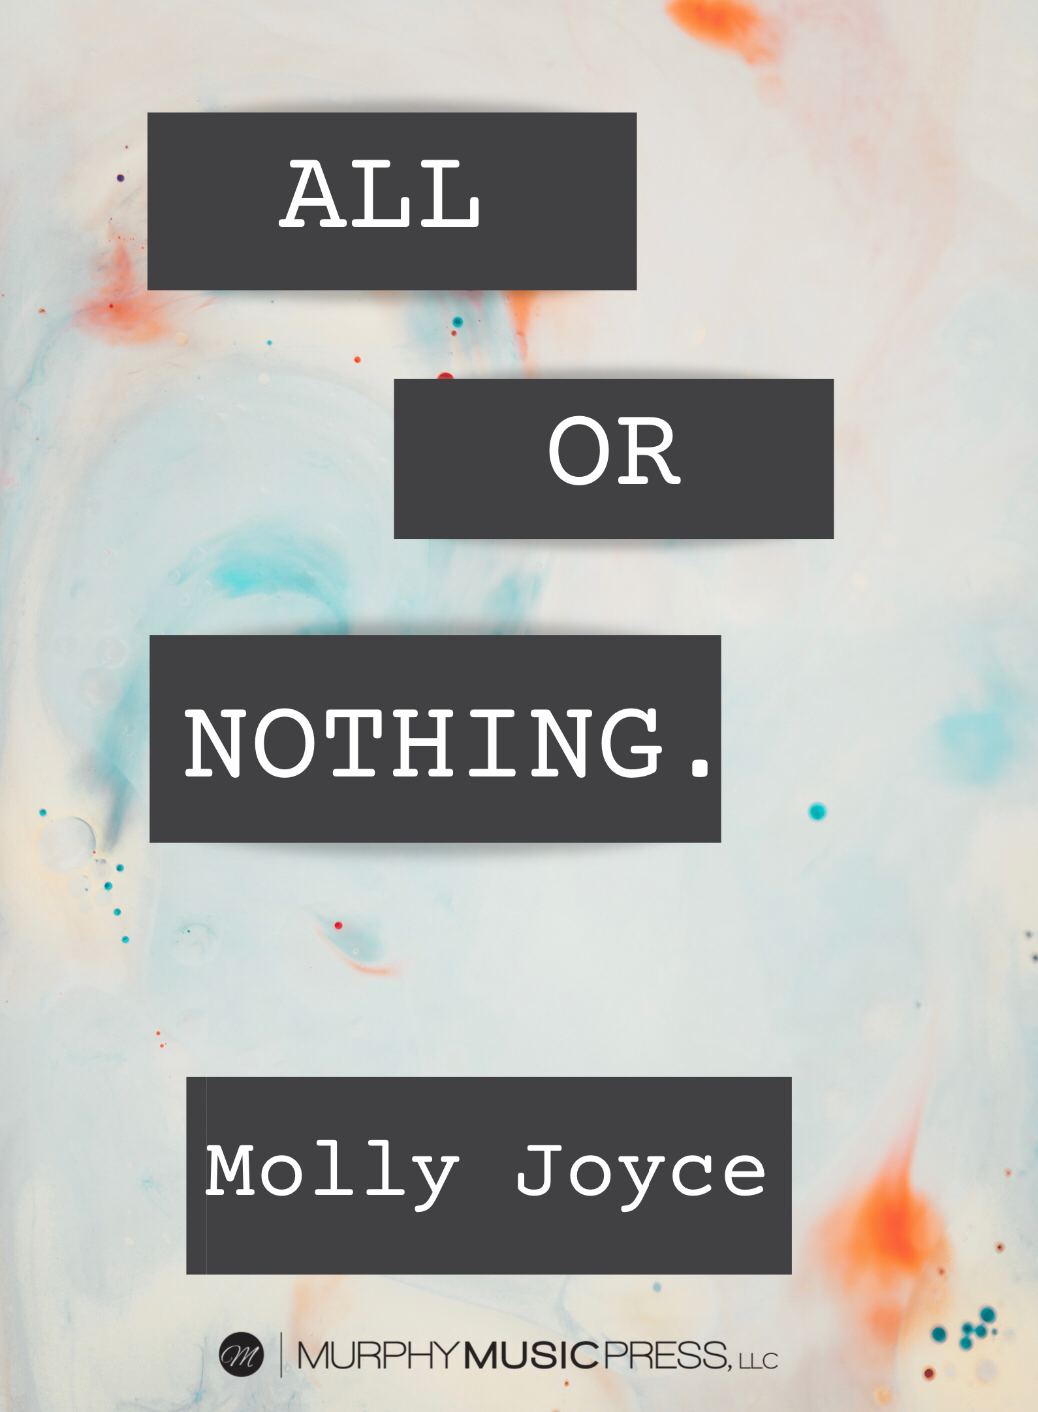 All Or Nothing by Molly Joyce